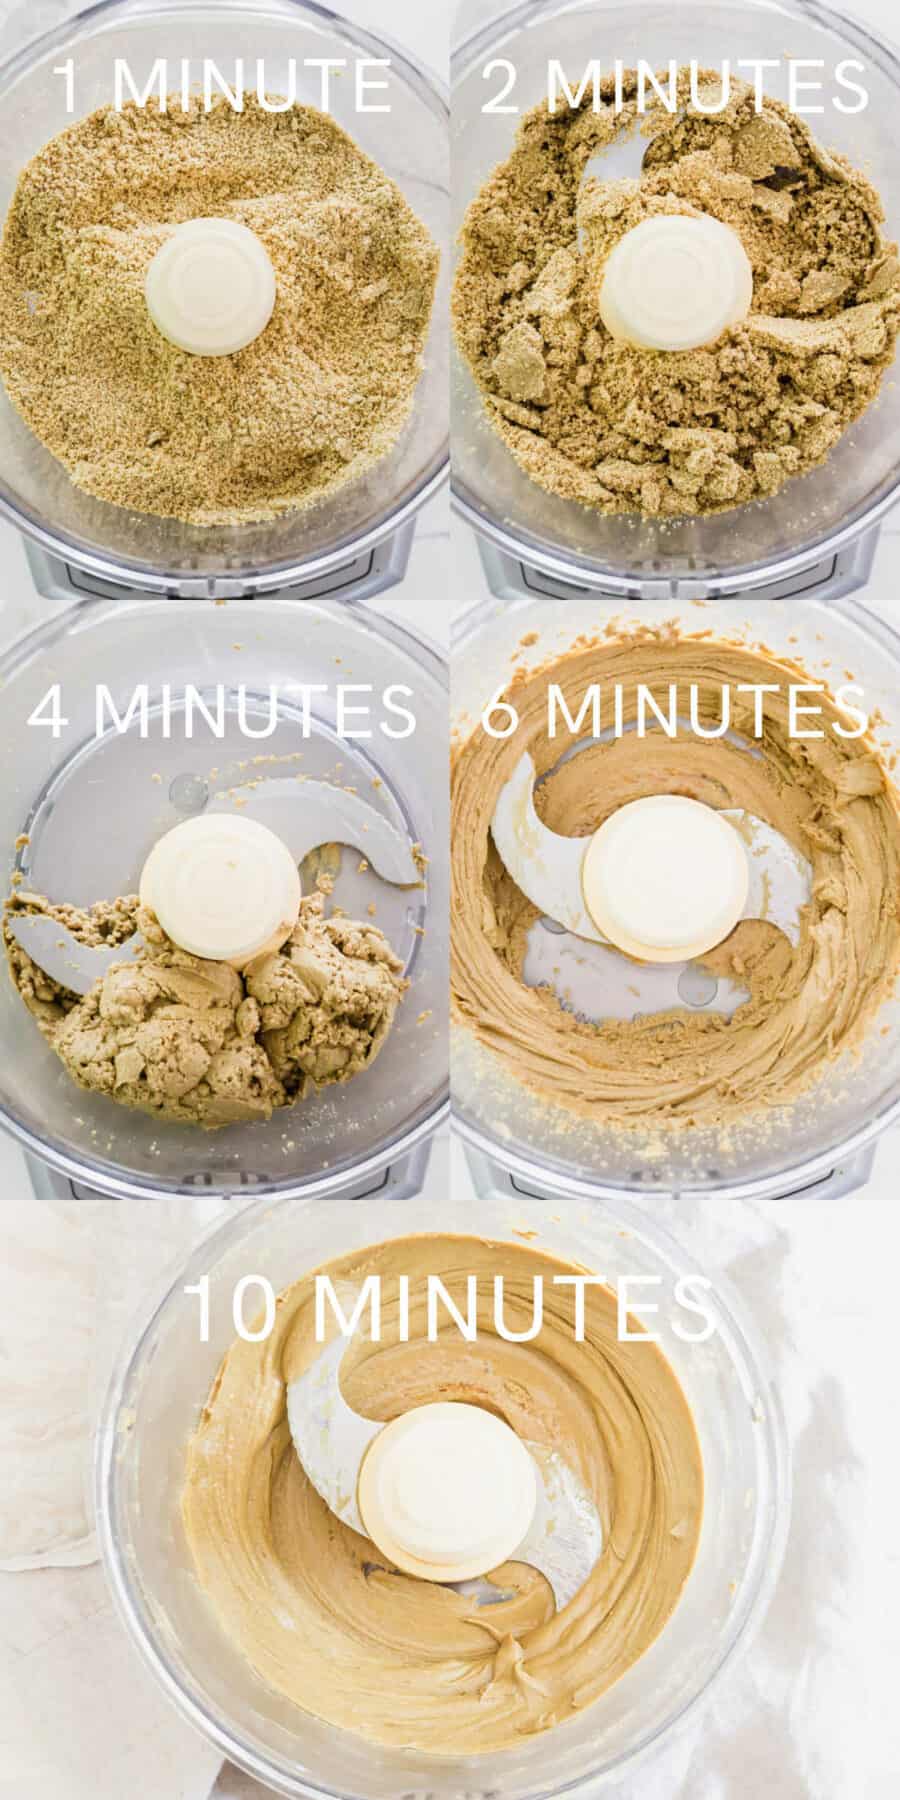 The stages of making pumpkin seed butter in a food processor over 10 minutes.